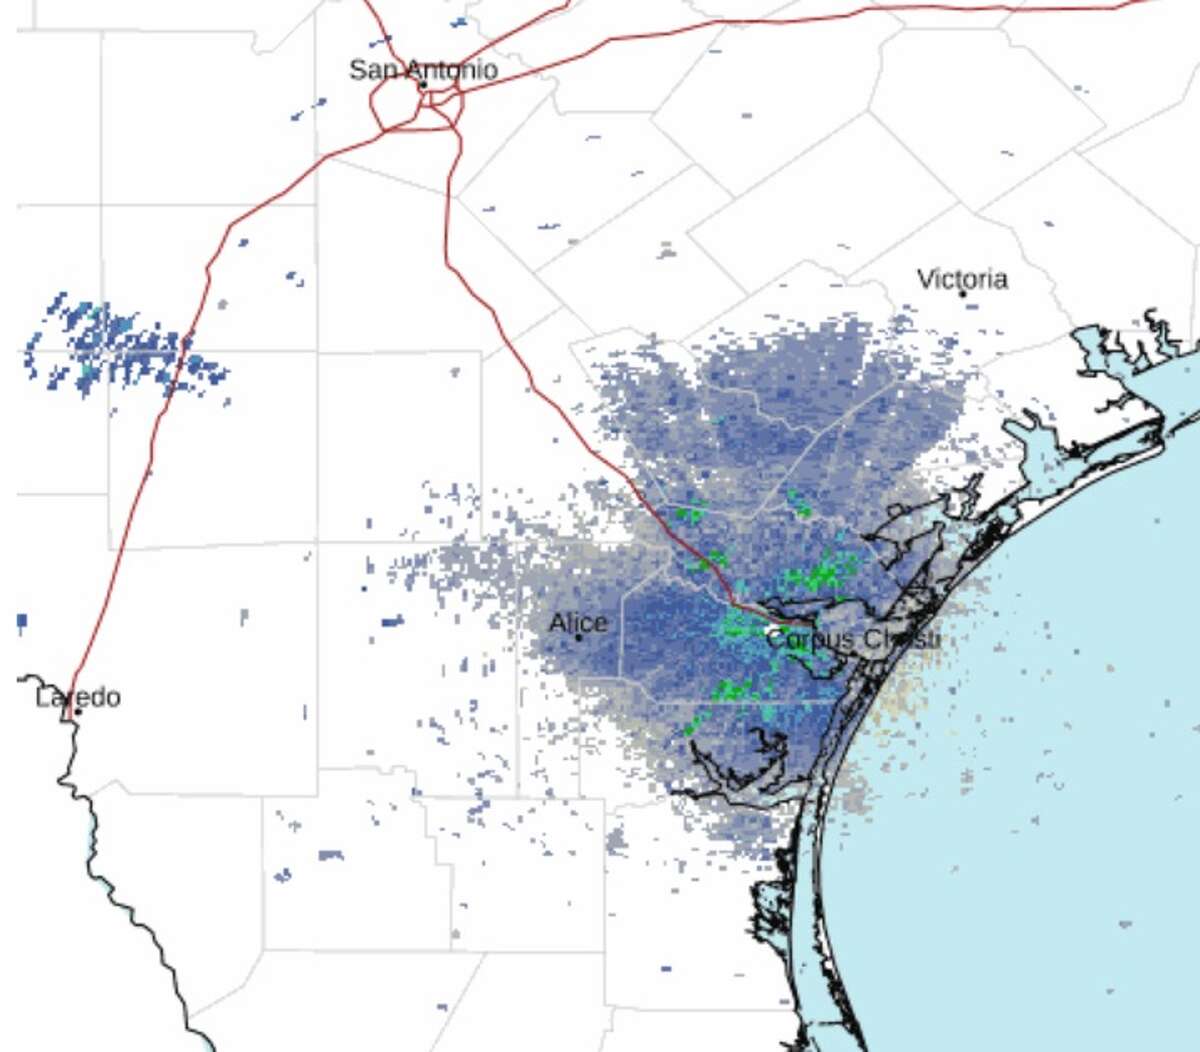 Cloud coverage in South Texas is shown on a radar at 1:03 p.m. on Monday, Nov. 28.